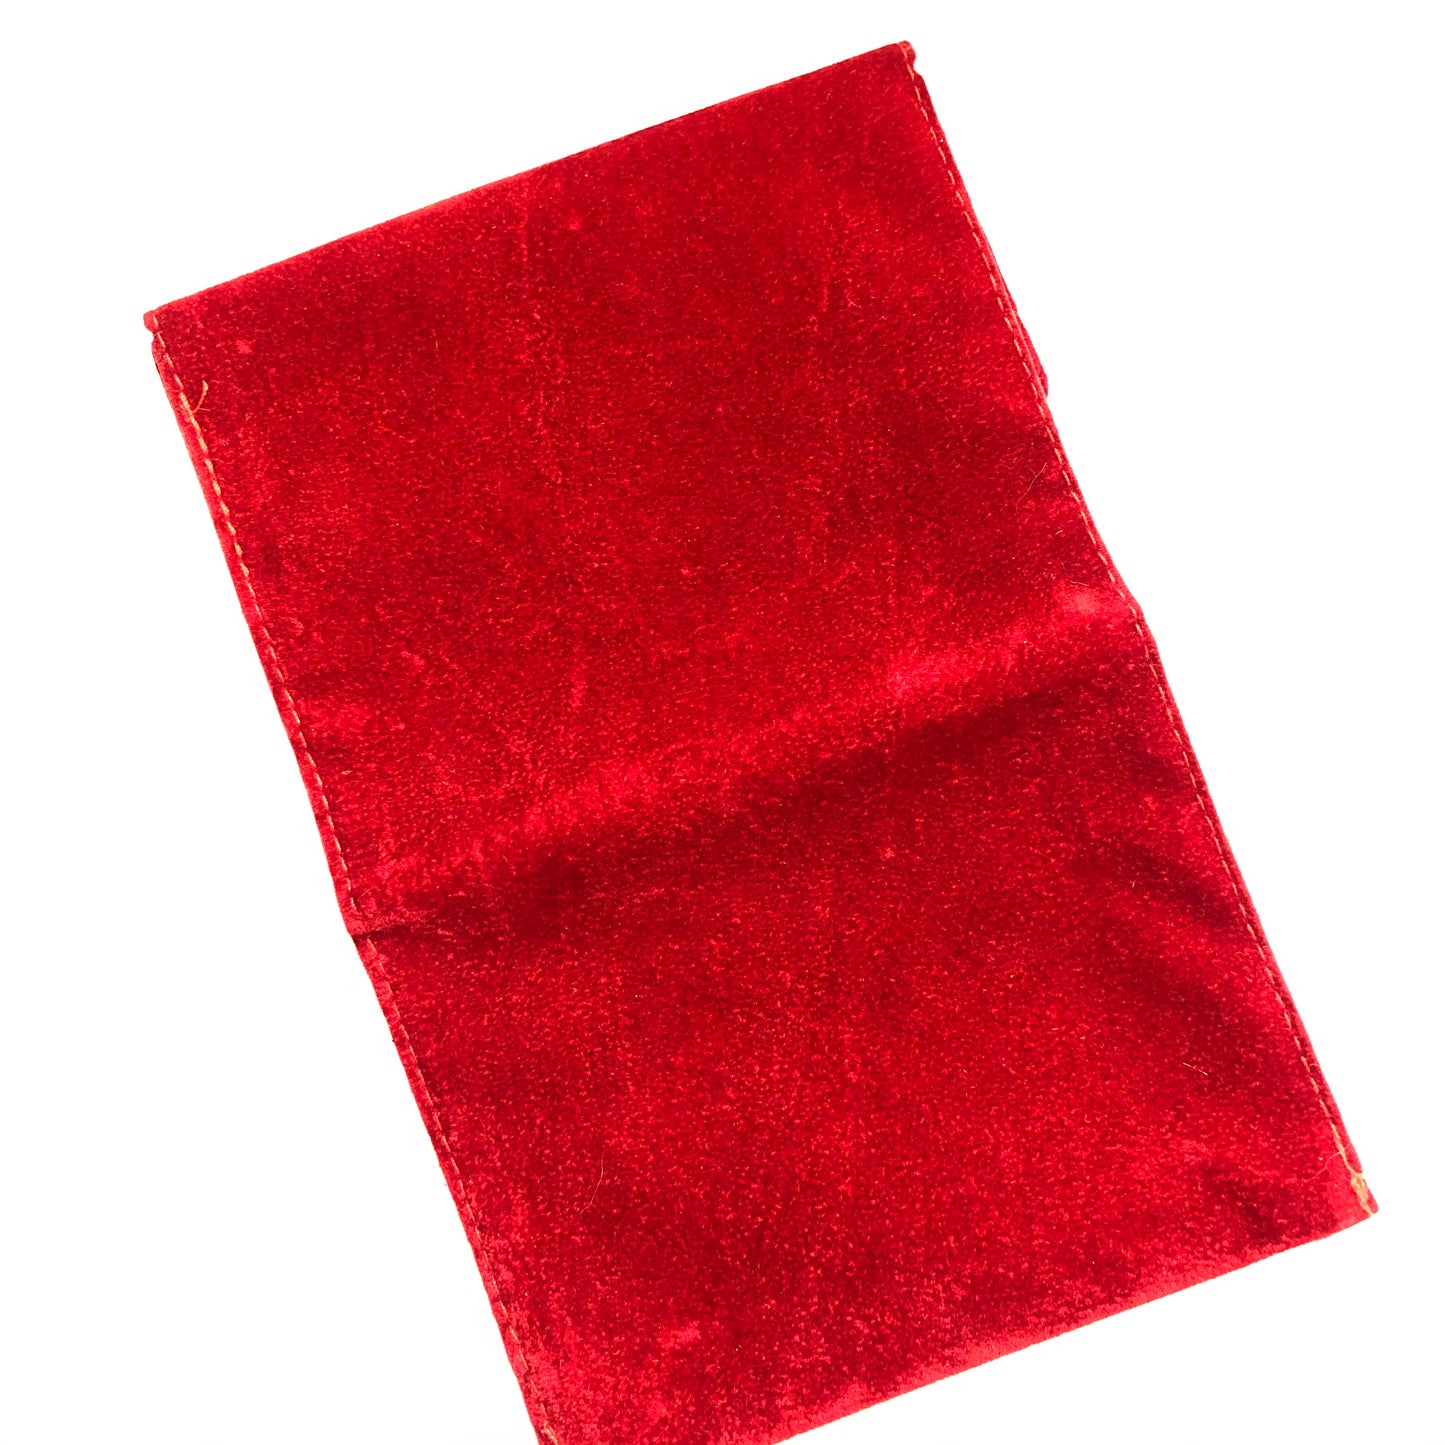 CARTIER Red Faux Suede Pouch 4.5 x 7.25 inches